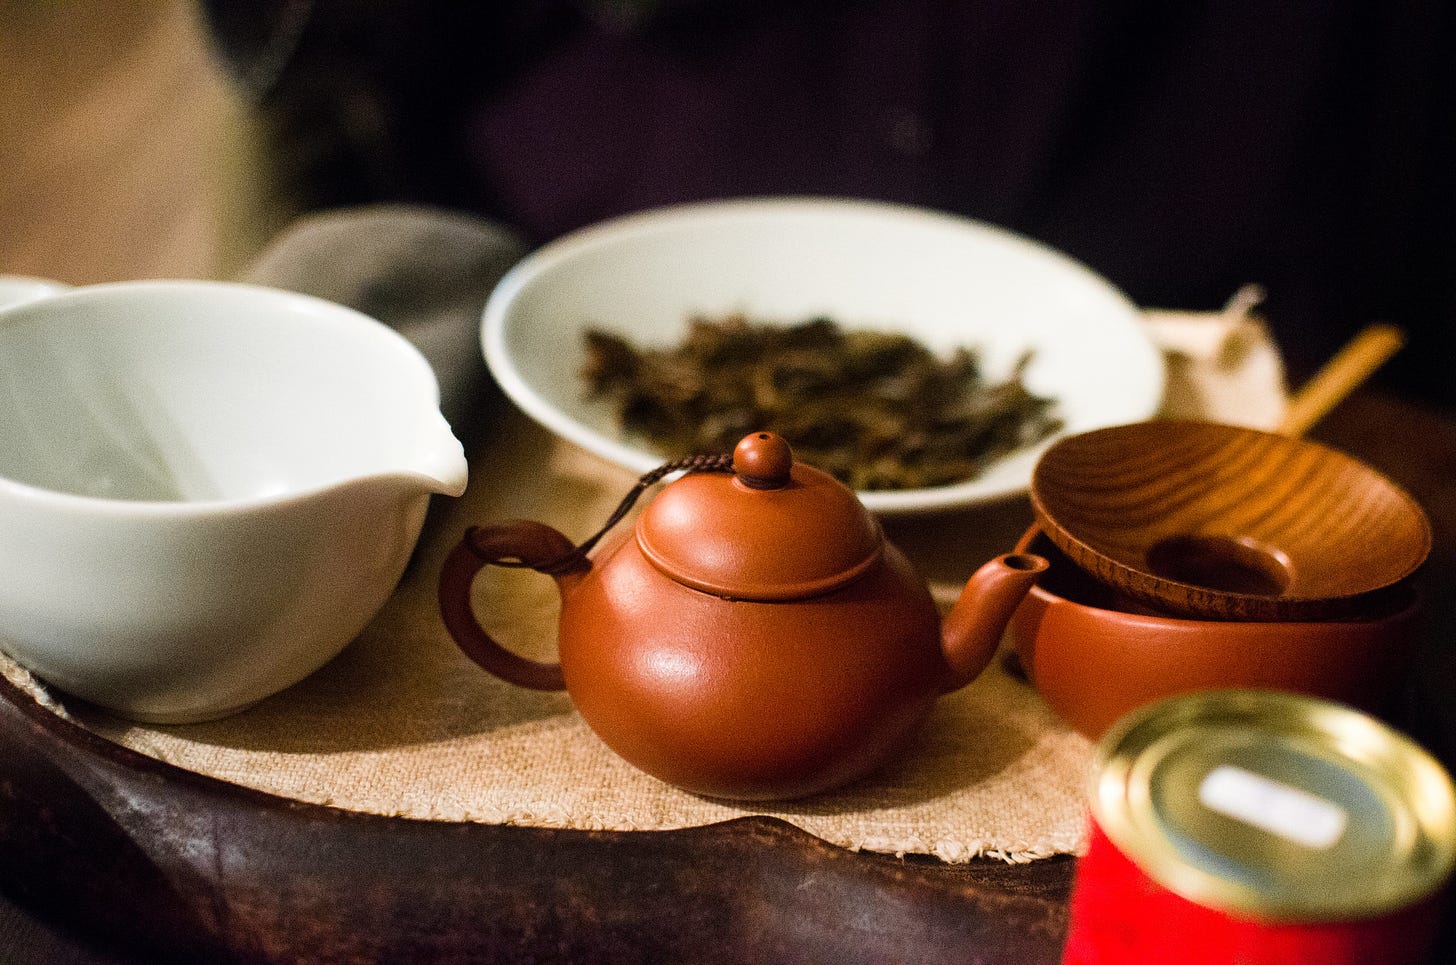 ID: Clay teapot and brewing accompaniments at Wistaria tea house